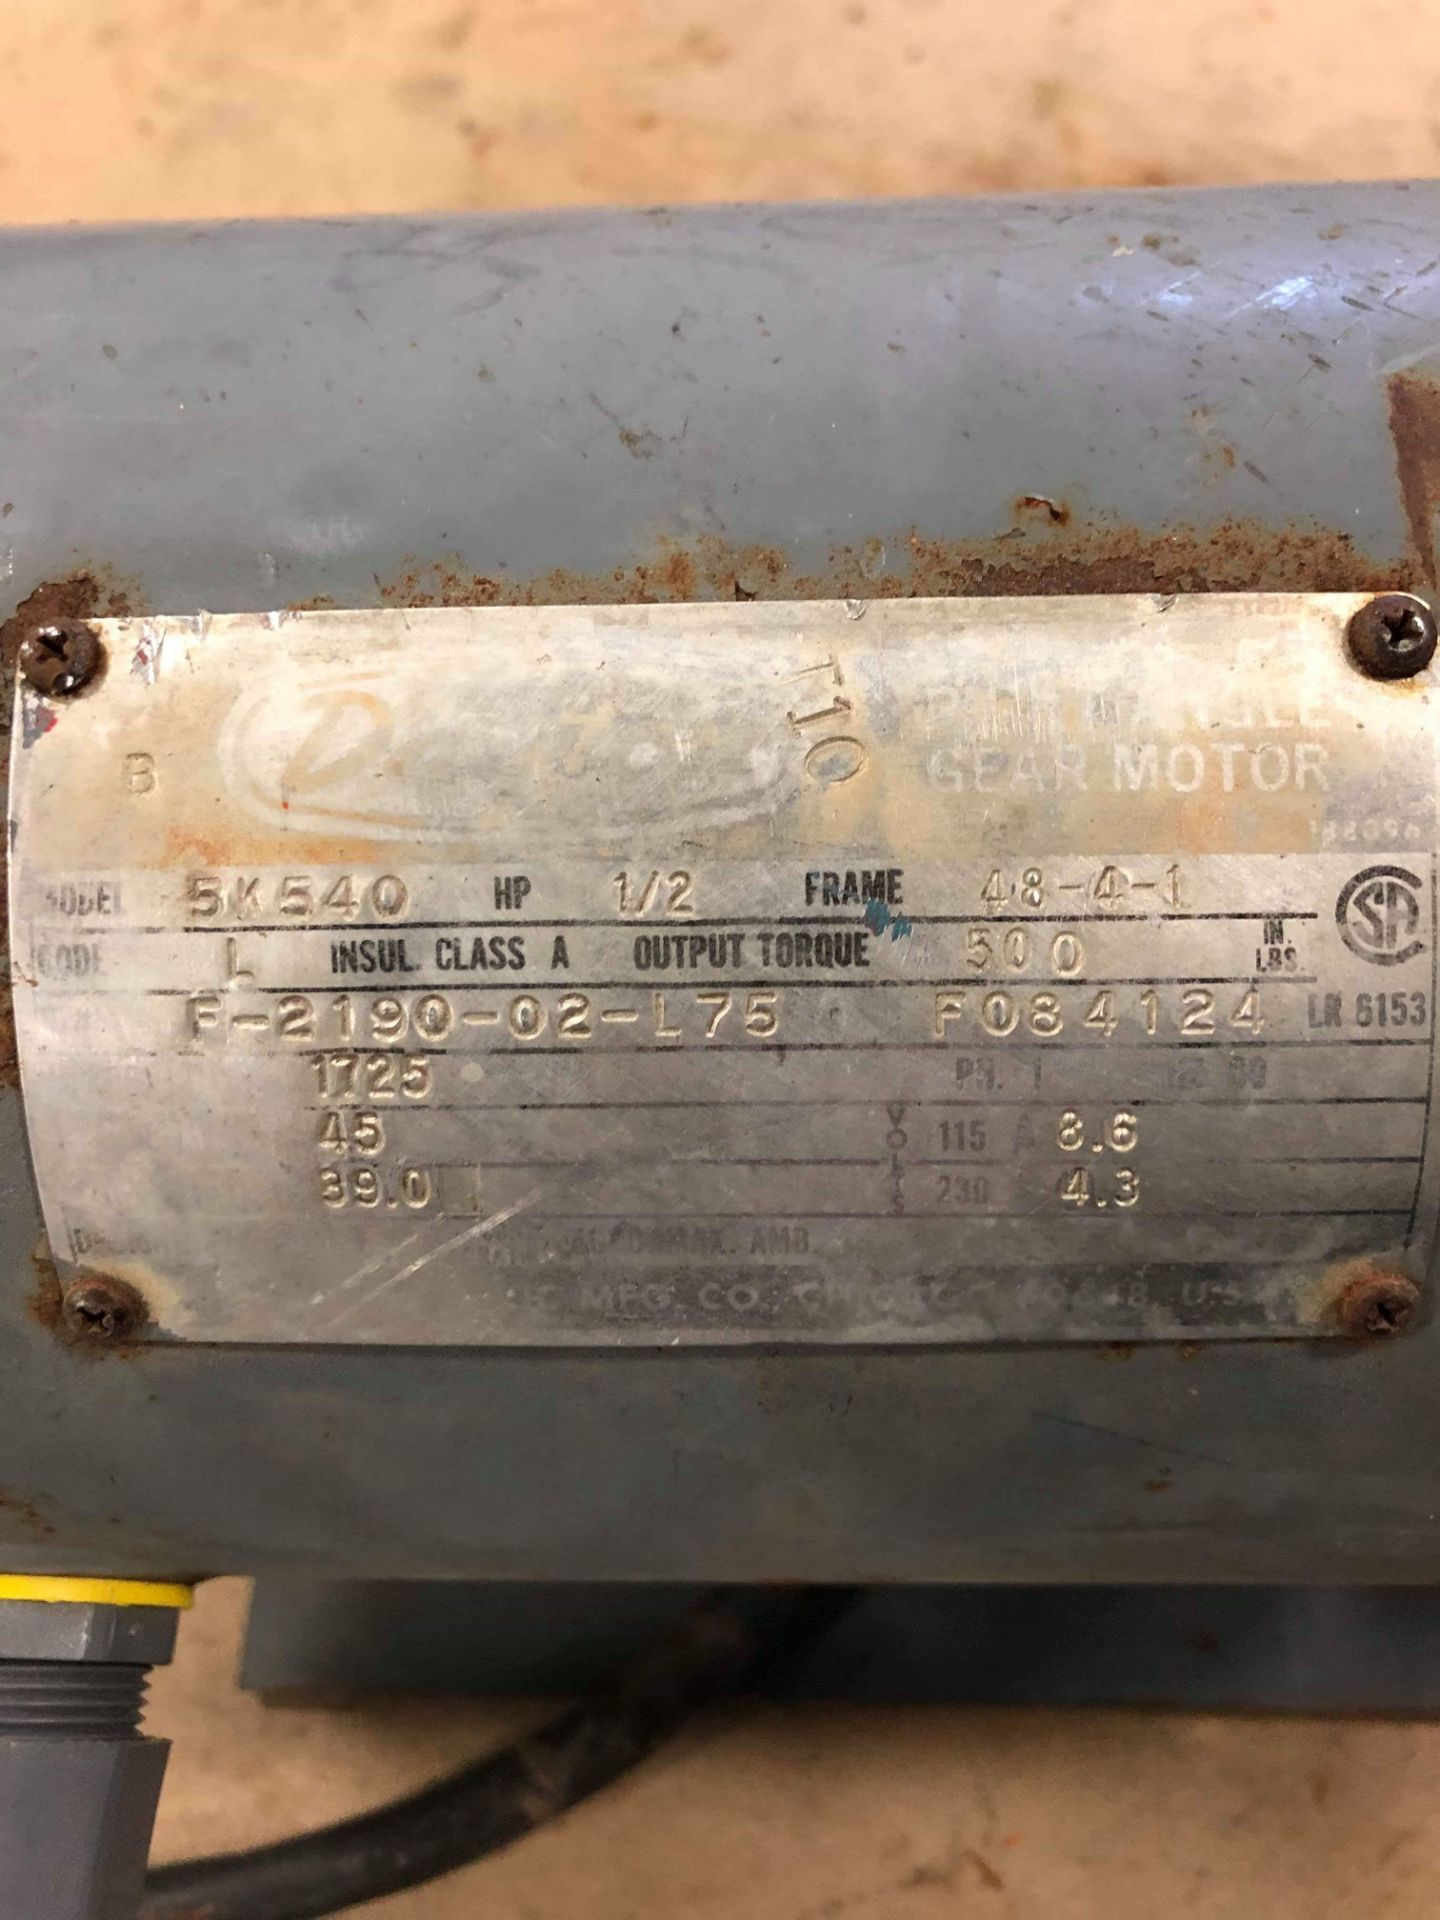 Dayton 1/2 hp Motor Gearbox, Model 5K540, S/N F-2190-02-L75 F084124 with Frame 48-4-1, 110/220 Volt, - Image 3 of 3